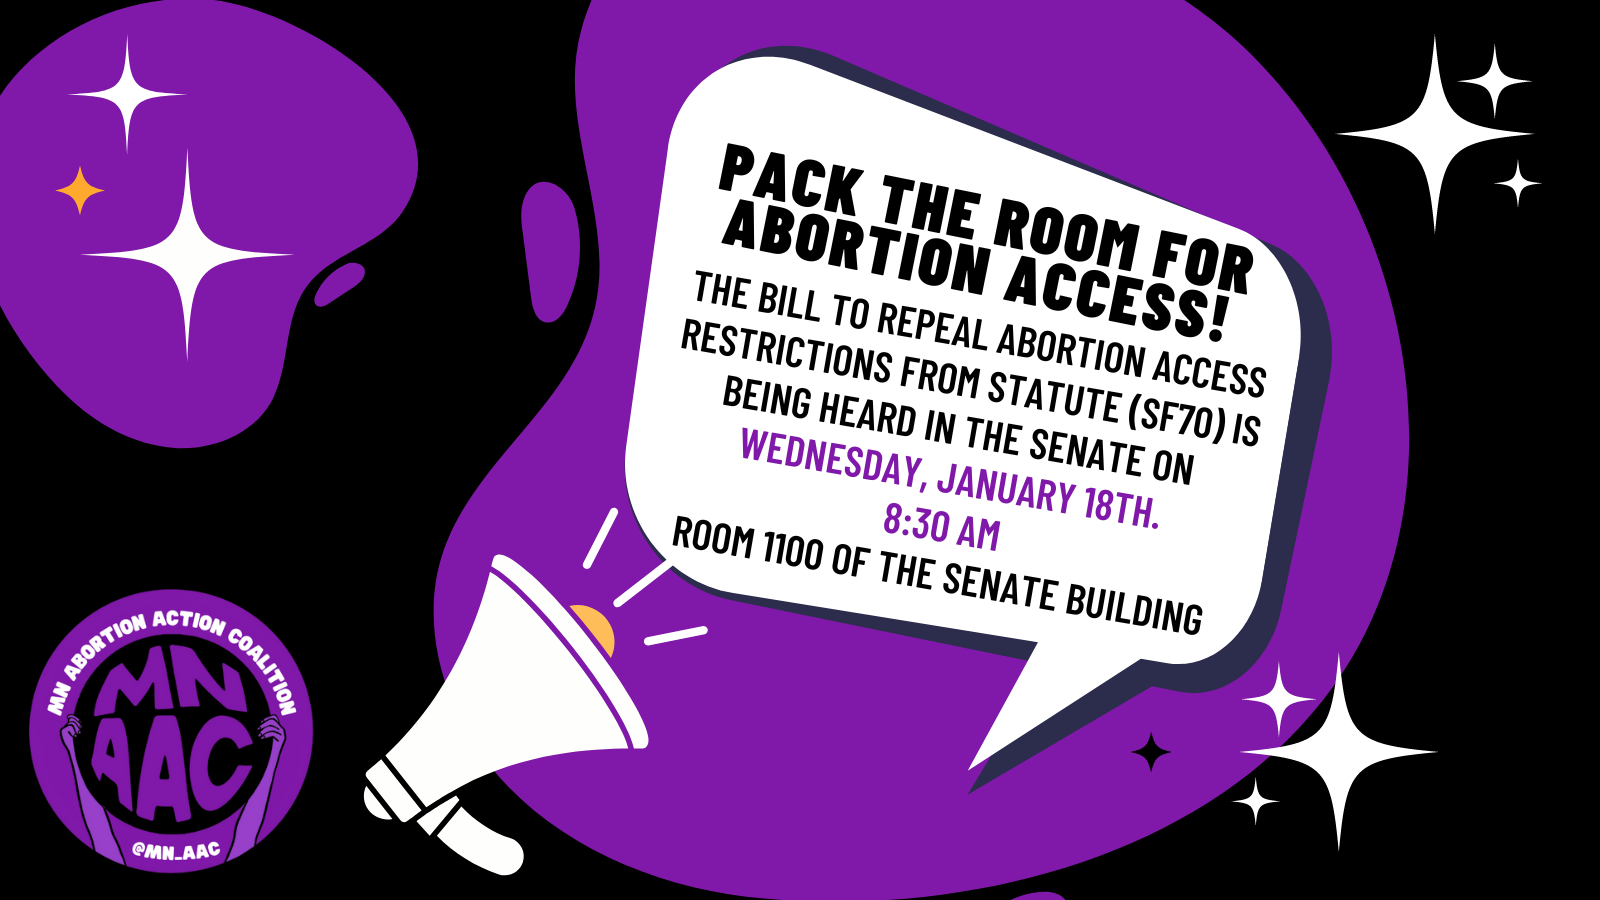 PACK THE ROOM FOR ABORTION ACCESS!